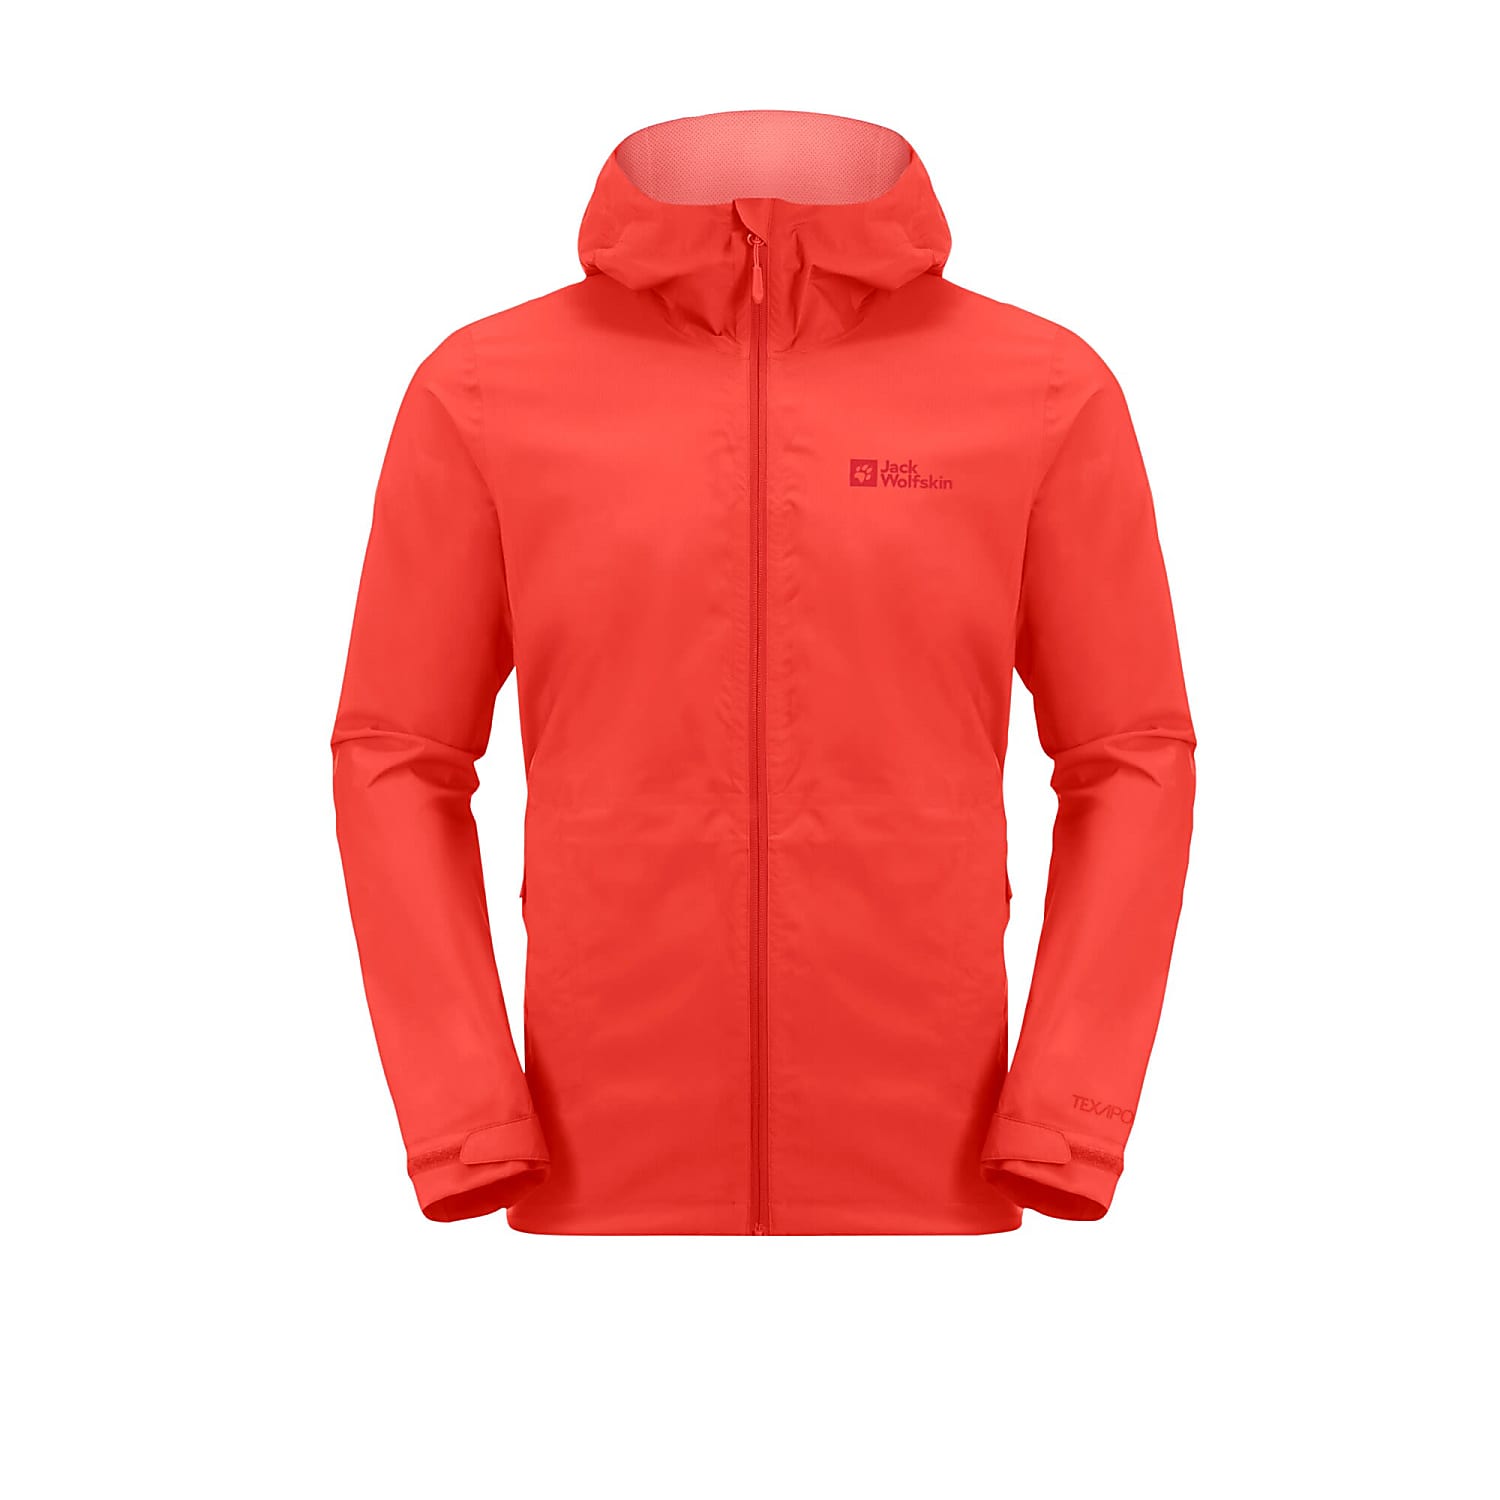 M Red Wolfskin cheap and ELSBERG Strong shipping JKT, Jack - 2.5L Fast